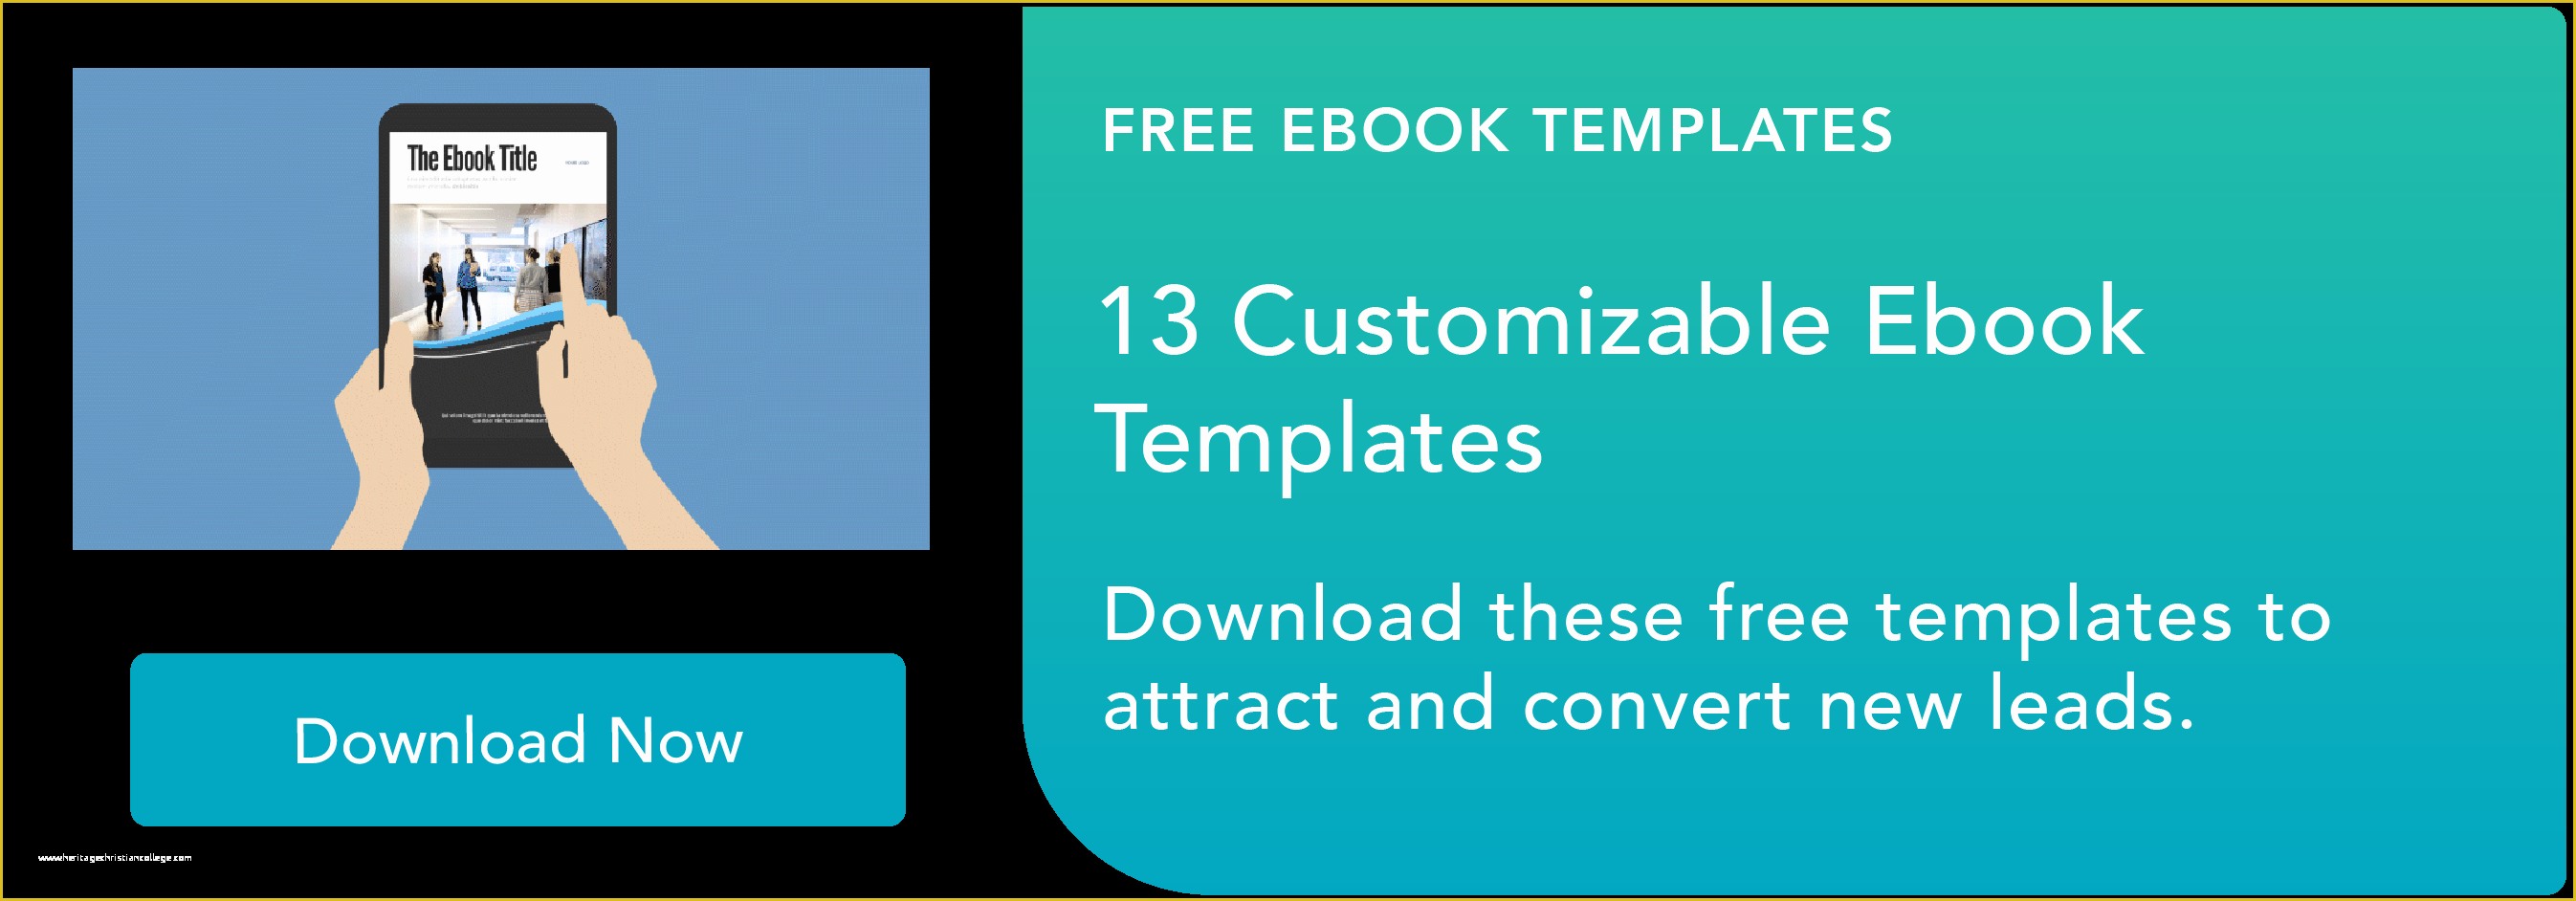 Free Ebook Templates for Microsoft Word Of 13 Beautiful New Ebook Templates [free Download]